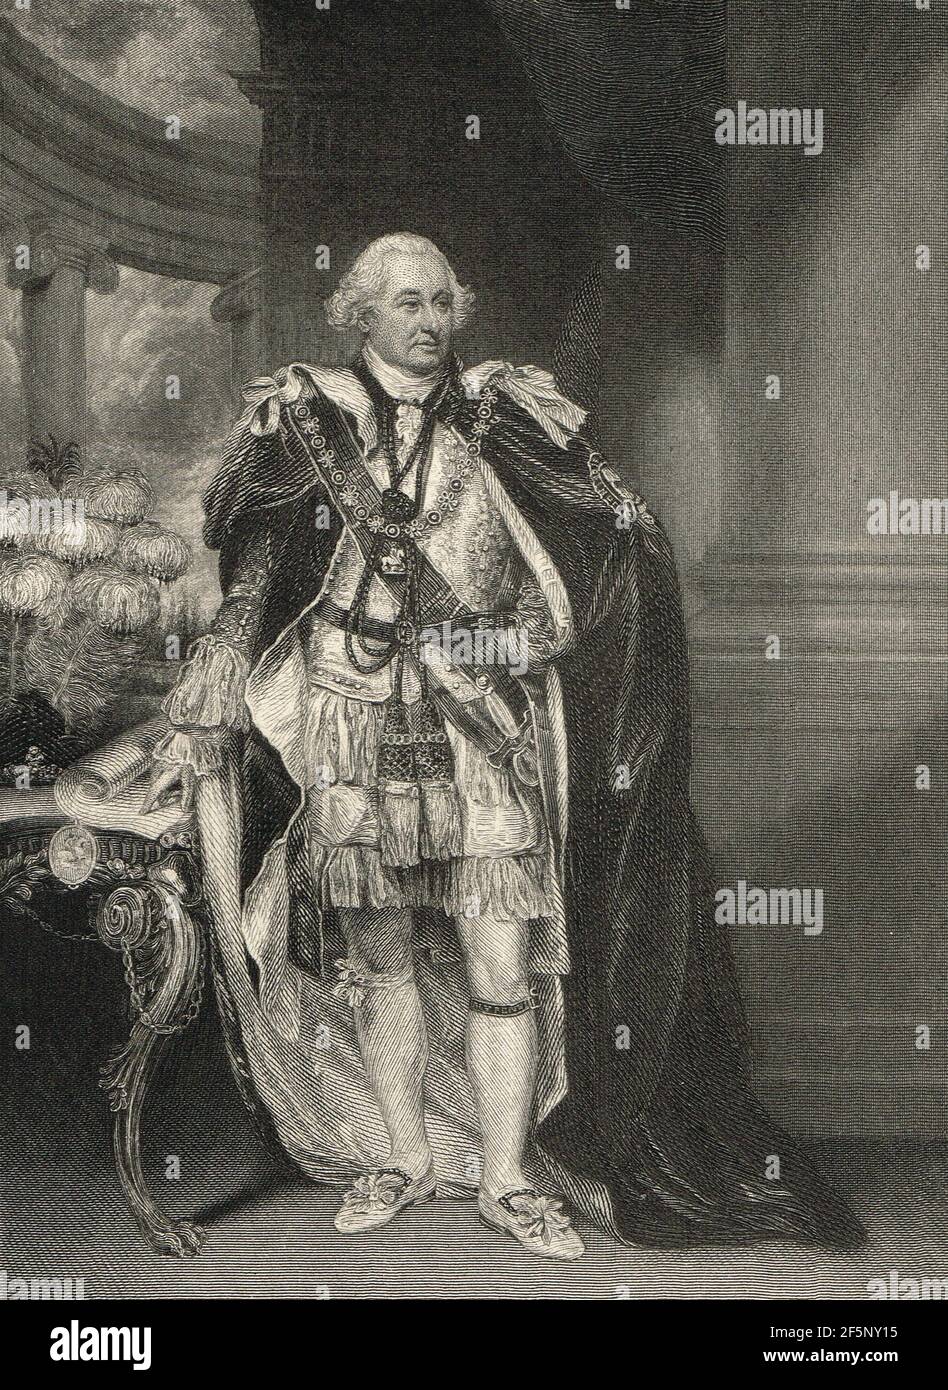 Charles Cornwallis, 1st Marquess Cornwallis, Lord Lieutenant and Commander-in-chief of Ireland, during the  Irish Rebellion of 1798 Stock Photo